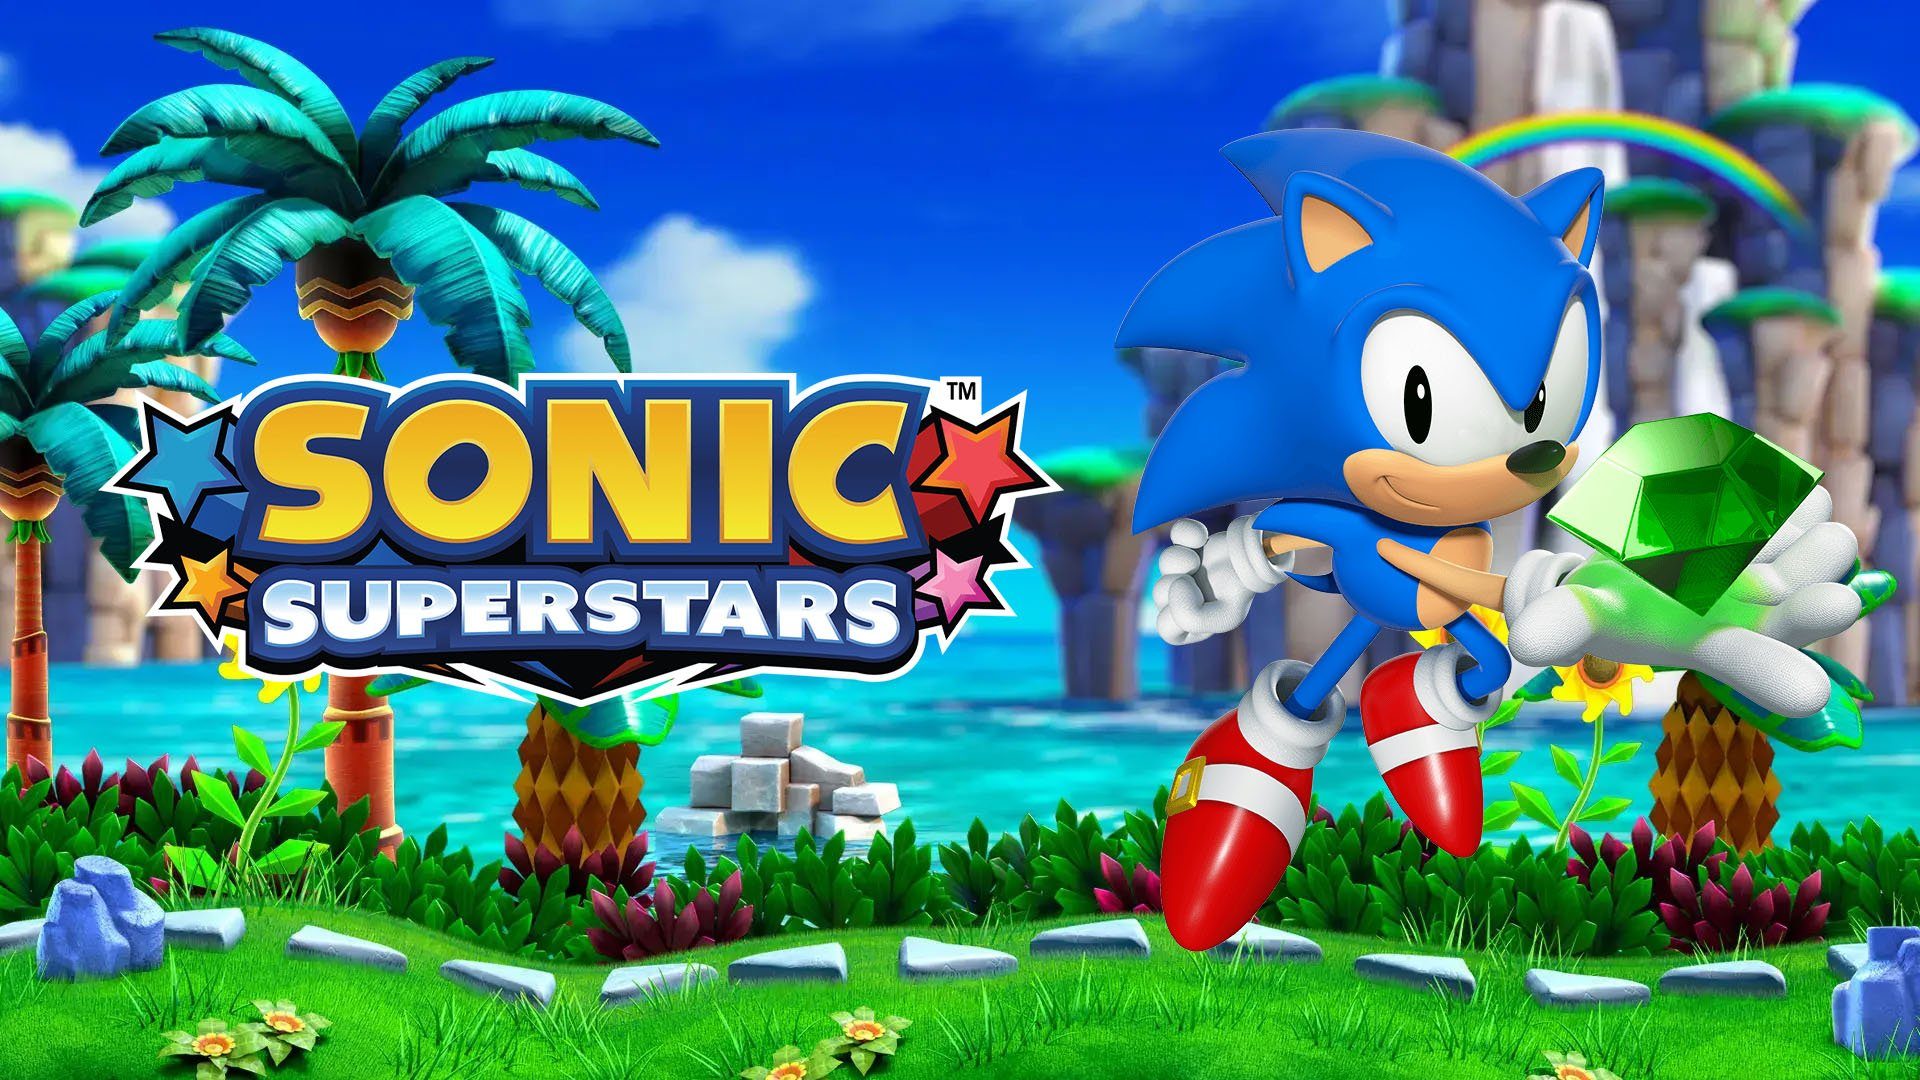 Sonic Superstars announced at Summer Game Fest - Polygon